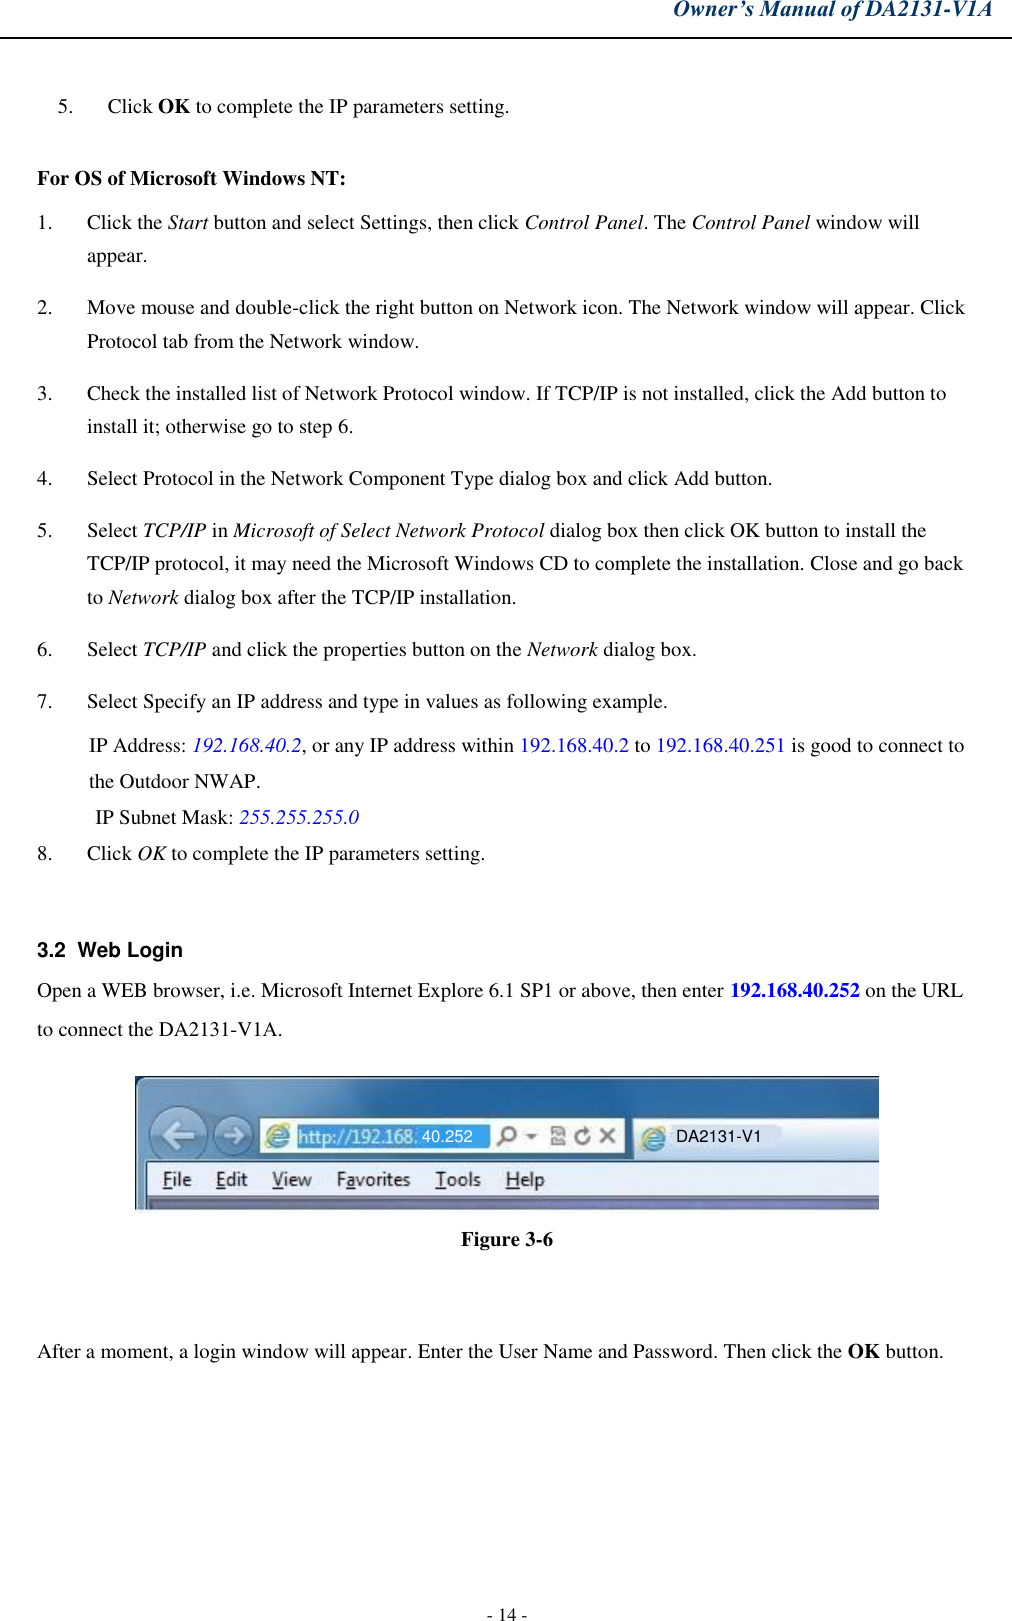 Owner’s Manual of DA2131-V1A - 14 - 5. Click OK to complete the IP parameters setting.For OS of Microsoft Windows NT: 1. Click the Start button and select Settings, then click Control Panel. The Control Panel window willappear.2. Move mouse and double-click the right button on Network icon. The Network window will appear. ClickProtocol tab from the Network window.3. Check the installed list of Network Protocol window. If TCP/IP is not installed, click the Add button toinstall it; otherwise go to step 6.4. Select Protocol in the Network Component Type dialog box and click Add button.5. Select TCP/IP in Microsoft of Select Network Protocol dialog box then click OK button to install theTCP/IP protocol, it may need the Microsoft Windows CD to complete the installation. Close and go backto Network dialog box after the TCP/IP installation.6. Select TCP/IP and click the properties button on the Network dialog box.7. Select Specify an IP address and type in values as following example.IP Address: 192.168.40.2, or any IP address within 192.168.40.2 to 192.168.40.251 is good to connect tothe Outdoor NWAP.IP Subnet Mask: 255.255.255.0 8. Click OK to complete the IP parameters setting.3.2  Web Login Open a WEB browser, i.e. Microsoft Internet Explore 6.1 SP1 or above, then enter 192.168.40.252 on the URL to connect the DA2131-V1A. Figure 3-6 After a moment, a login window will appear. Enter the User Name and Password. Then click the OK button. DA2131-V1 40.252 